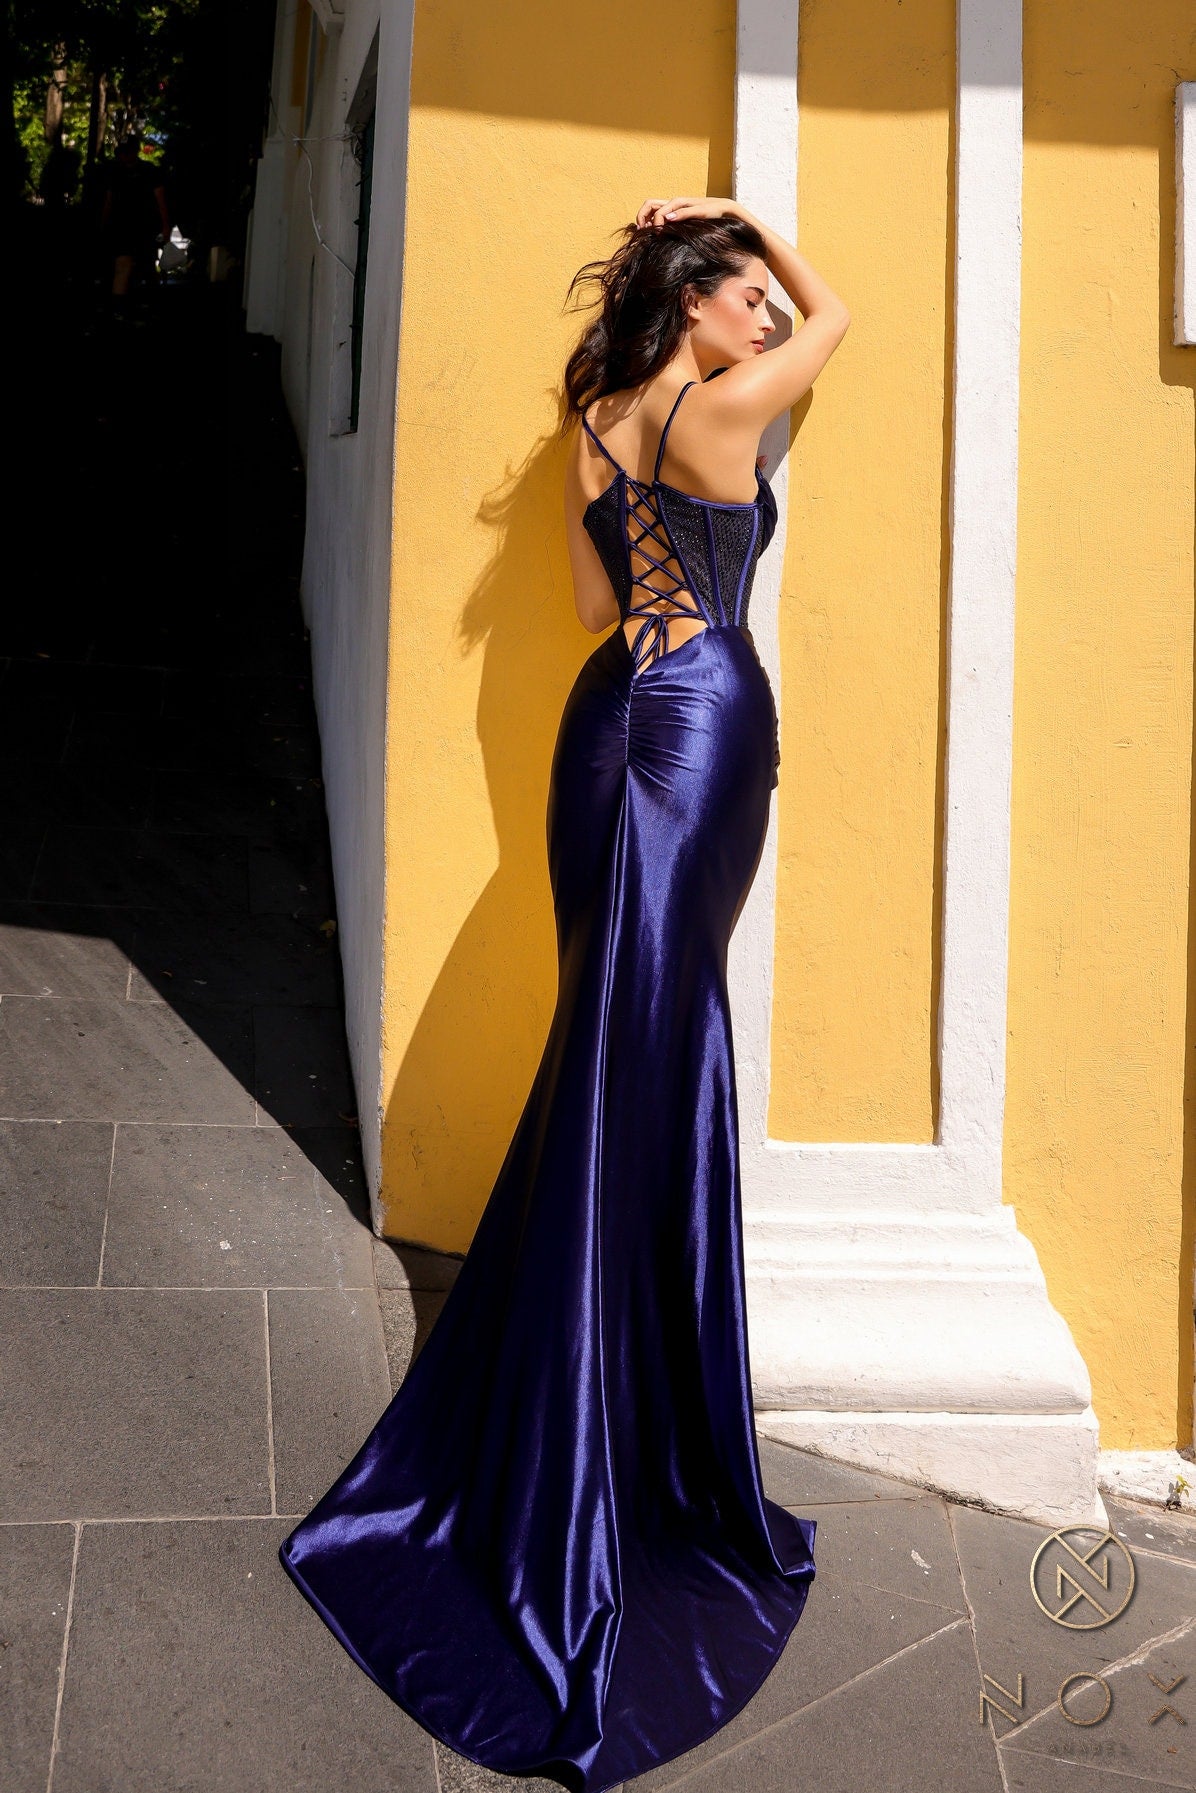 Fitted Sweetheart Neckline Gathered Waist Formal Bridesmaid Dress Minimalist Prom Gala Open Back Straps Sparkle Details